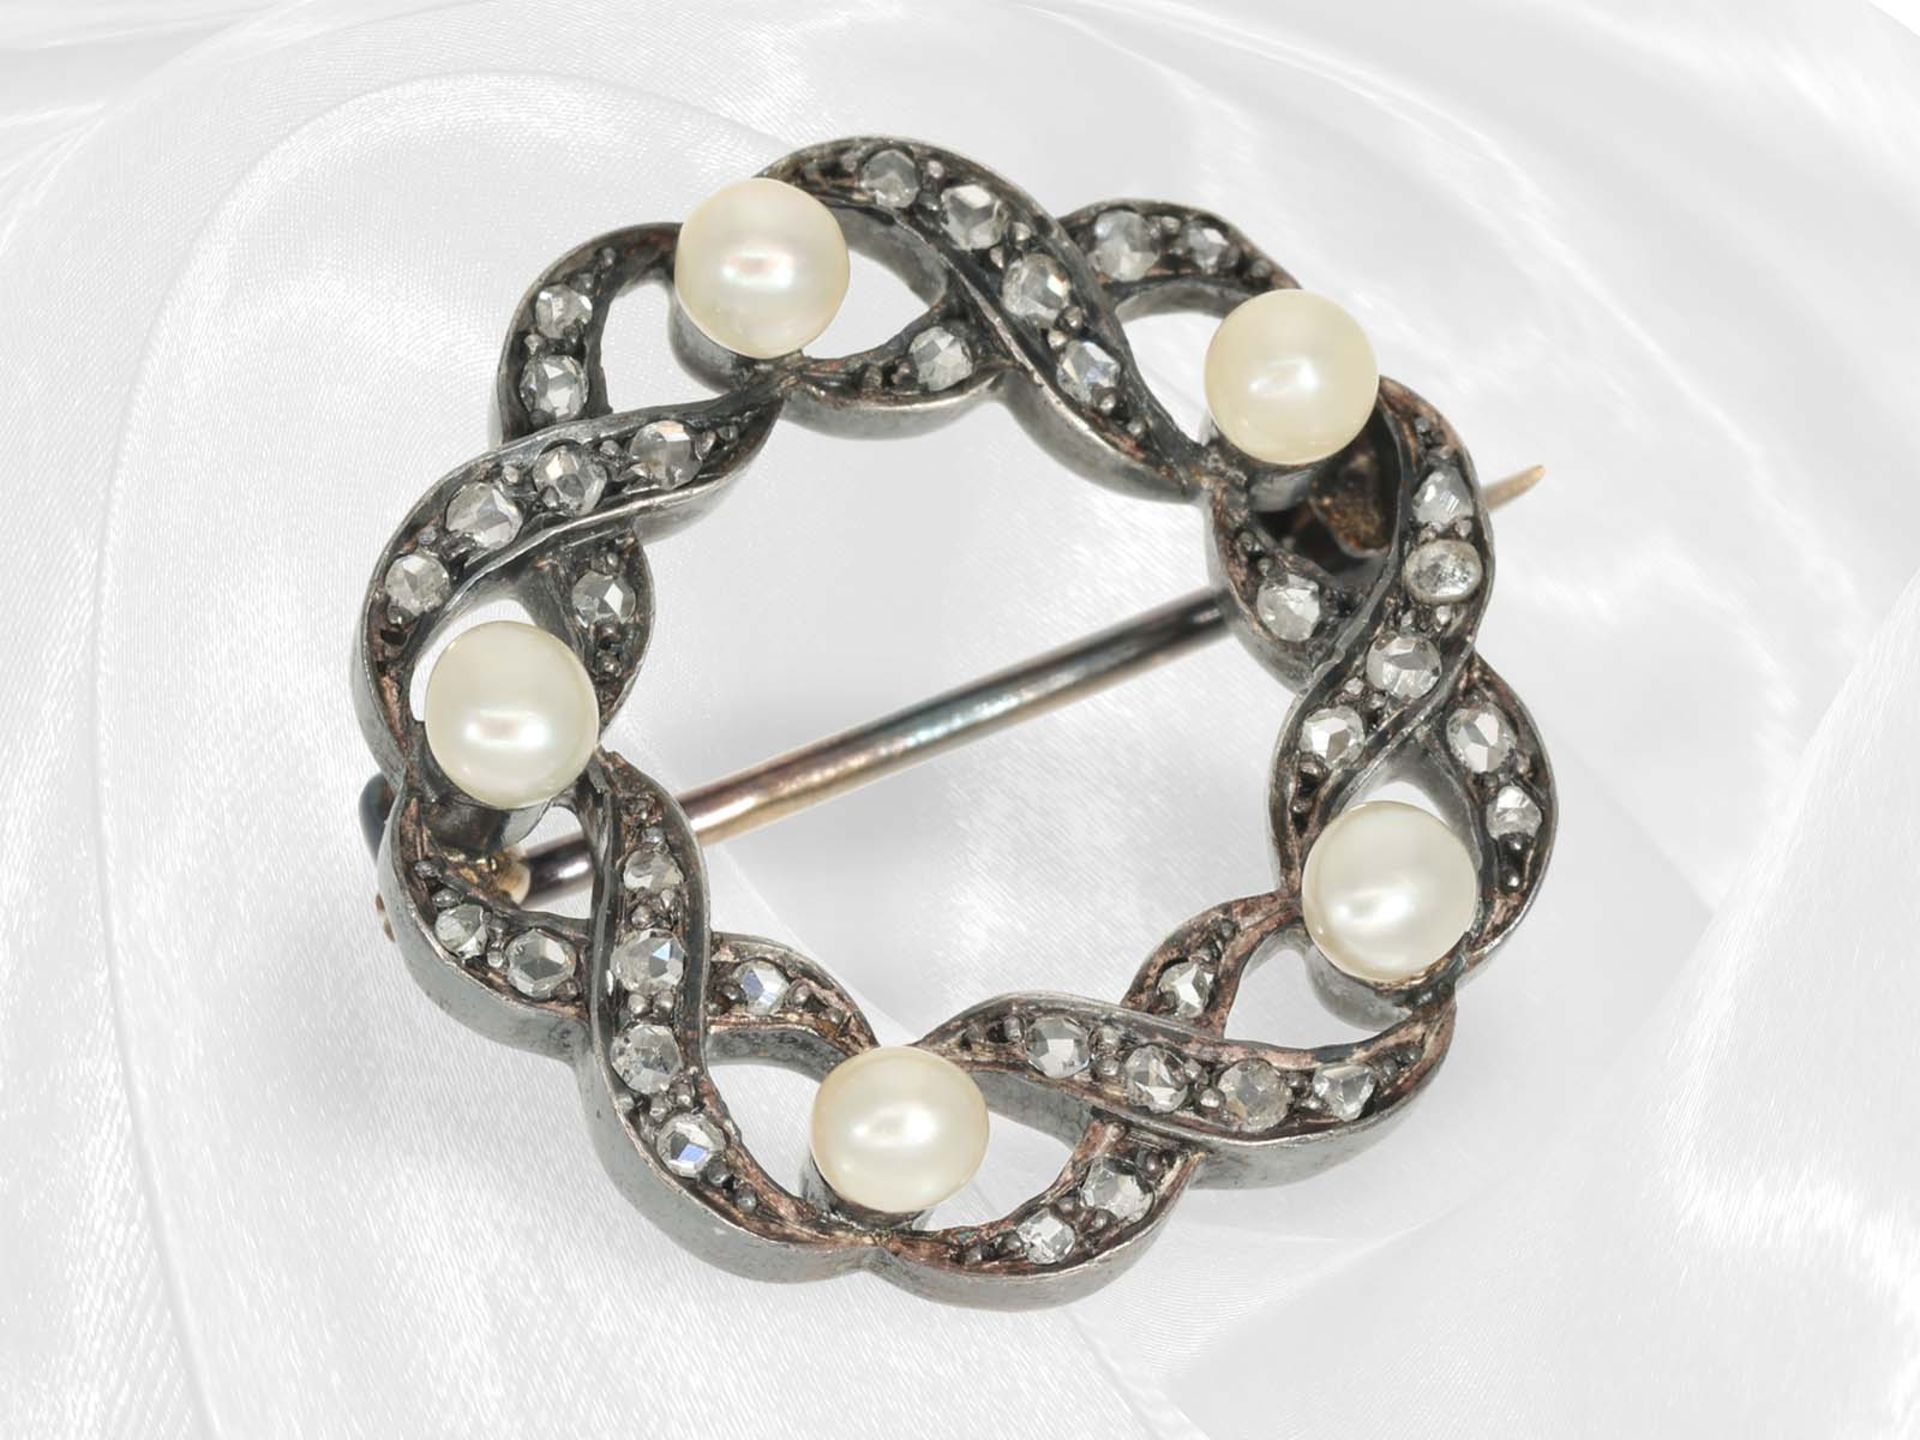 Antique diamond/pearl brooch, France ca. 1880 - Image 2 of 3